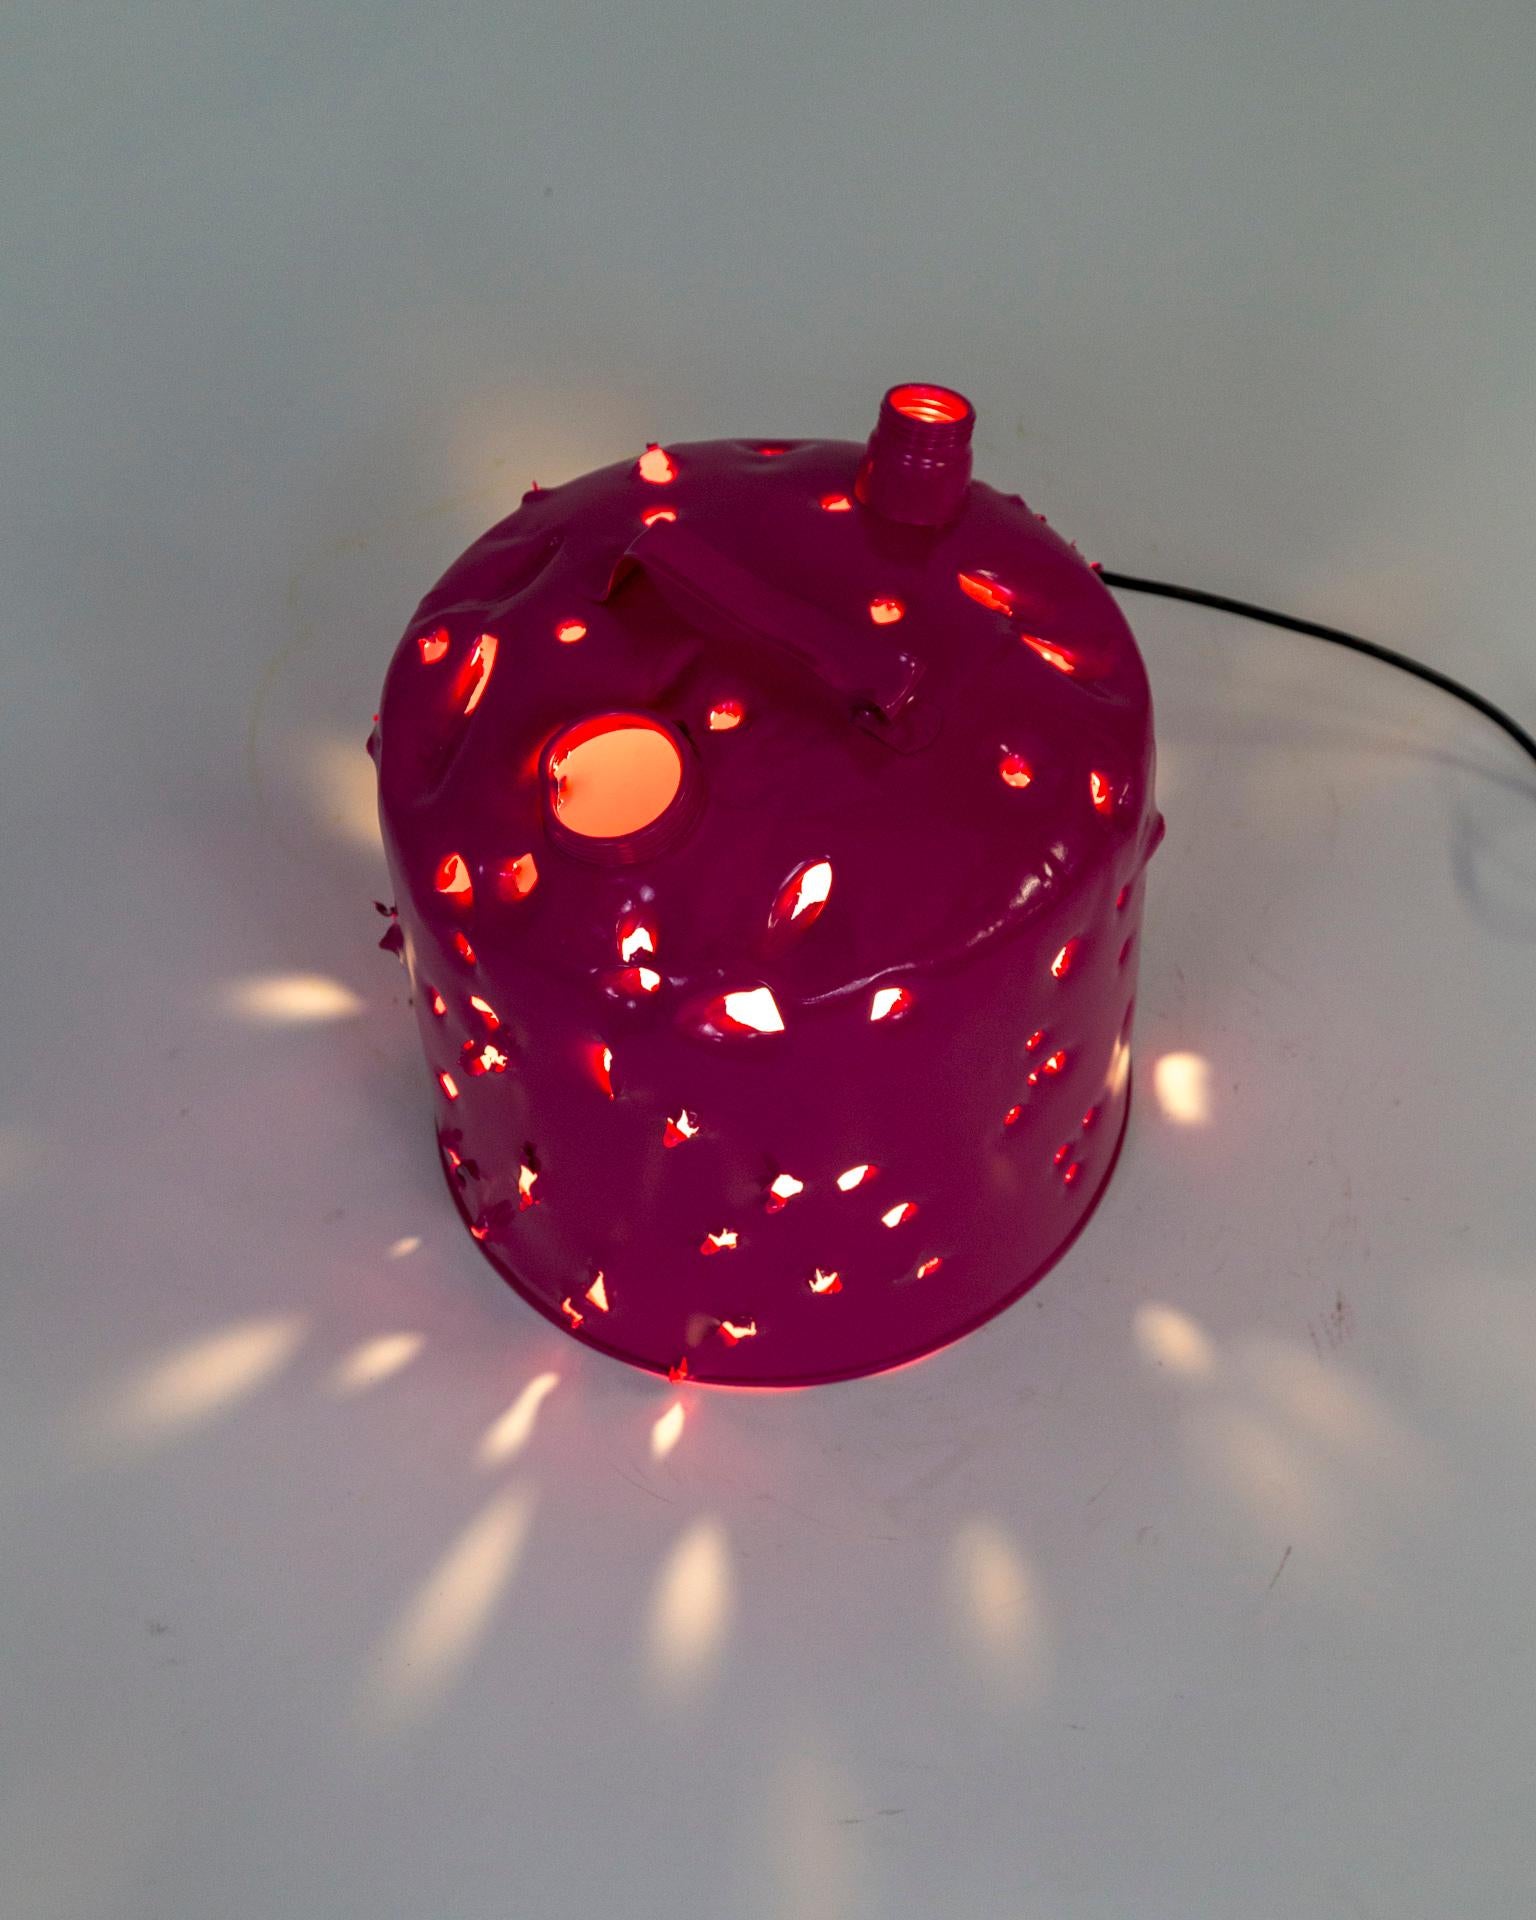 Powder-Coated Magenta Bullet Hole Gas Can Lamp by Charles Linder